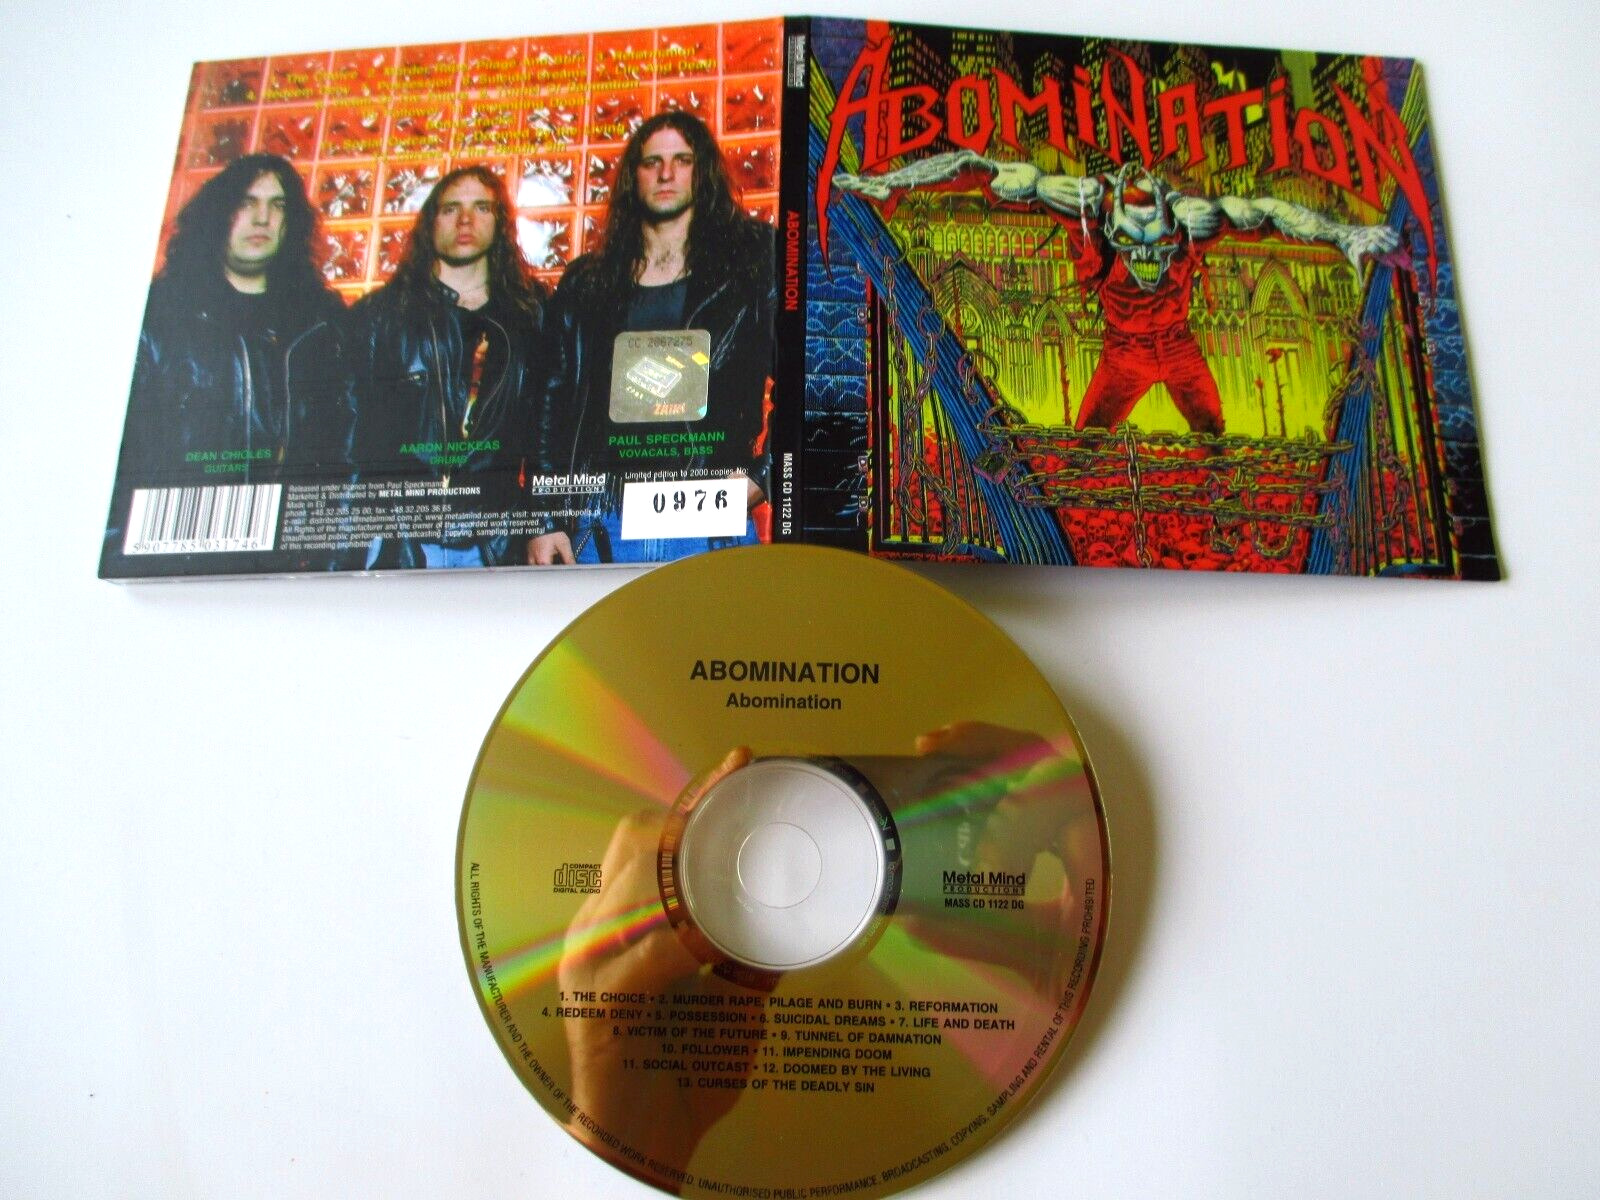 Abomination – Tragedy Strikes / Abomination 2 Cd lot